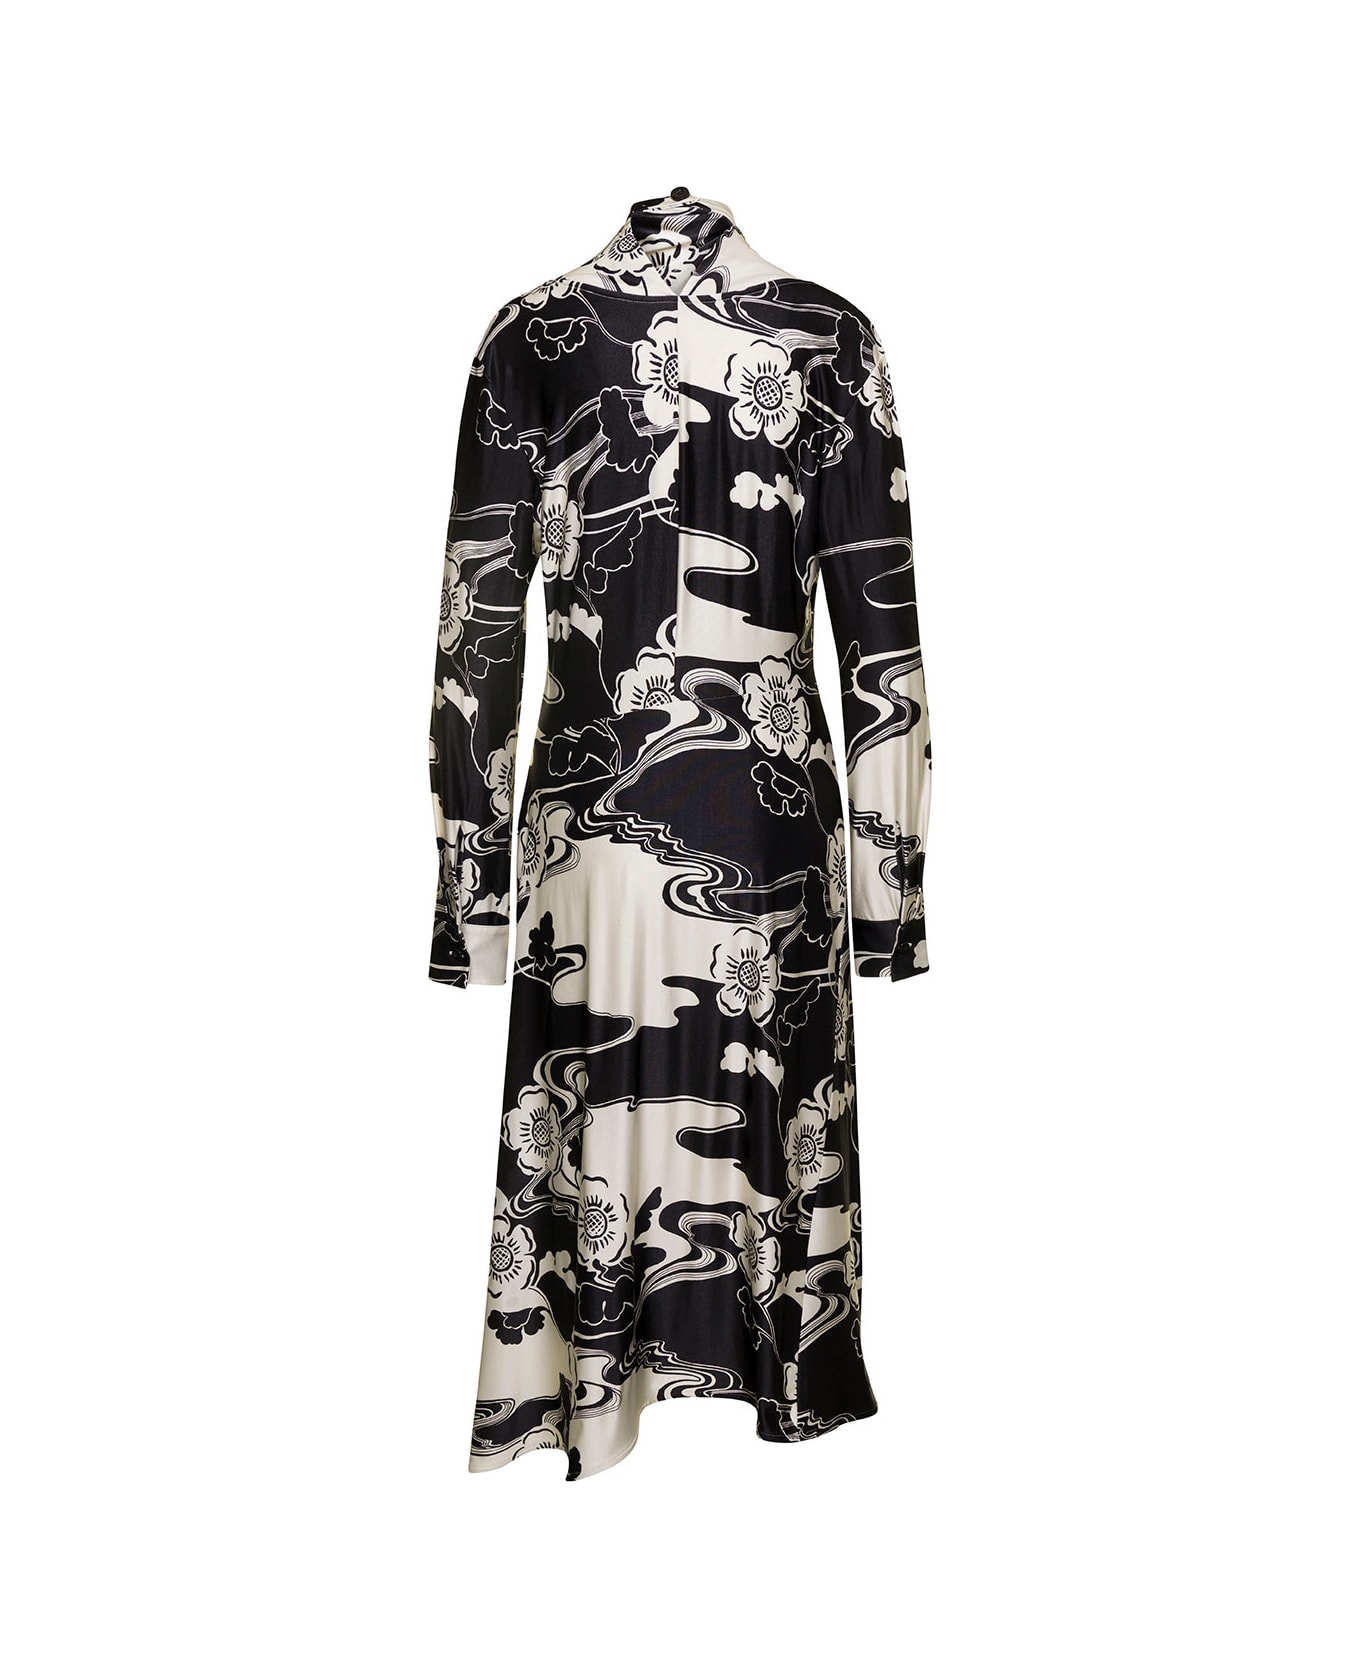 Jil Sander Midi Black And White Floreal Printed Dress With High Neck In Viscose Blend Woman - White